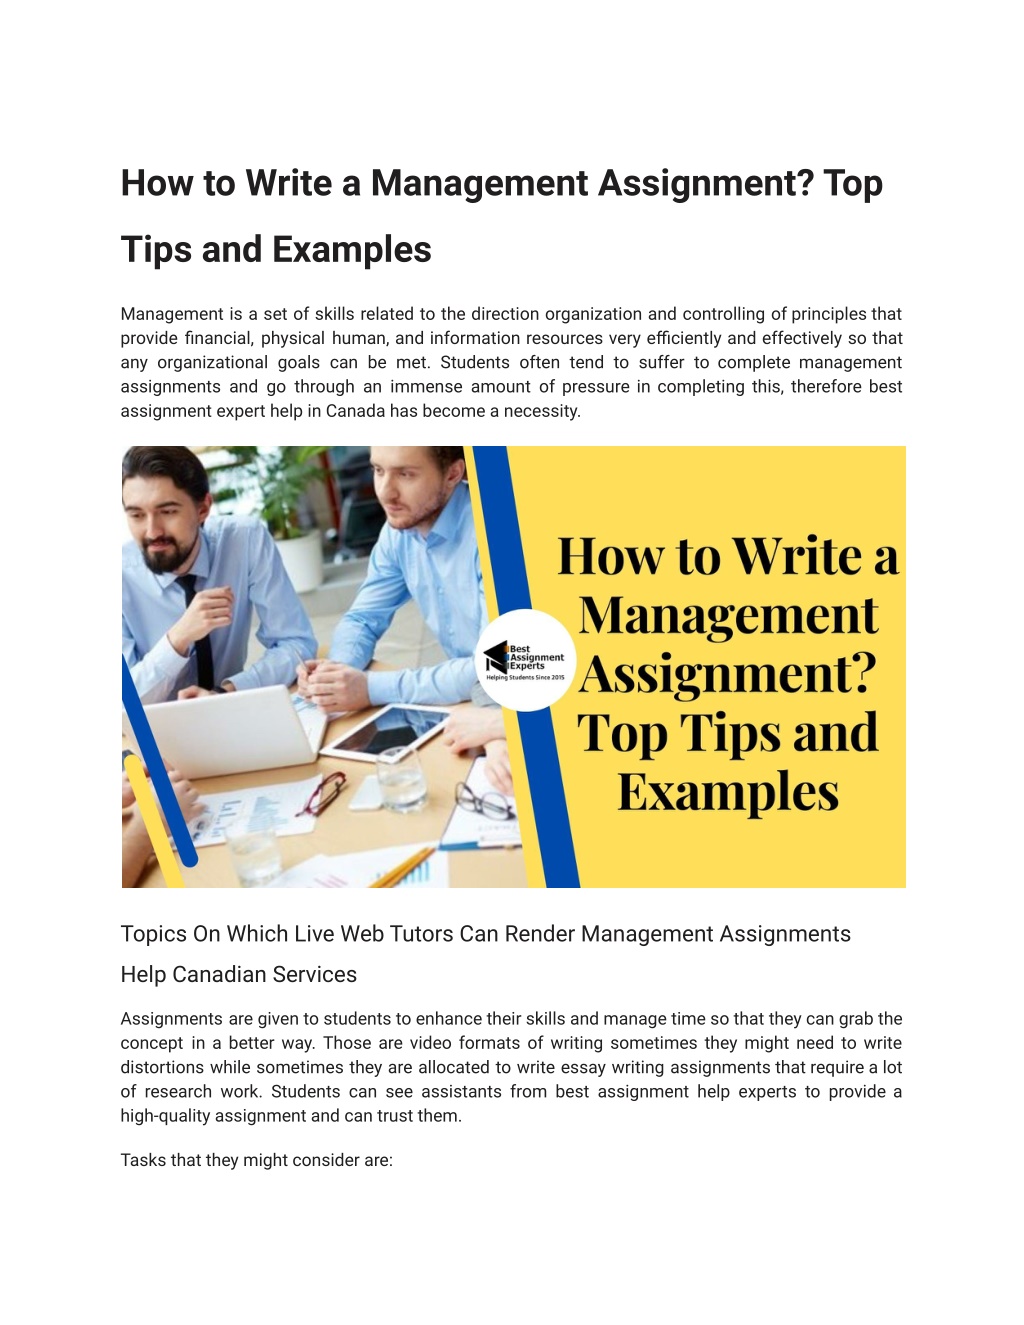 assignment meaning in management